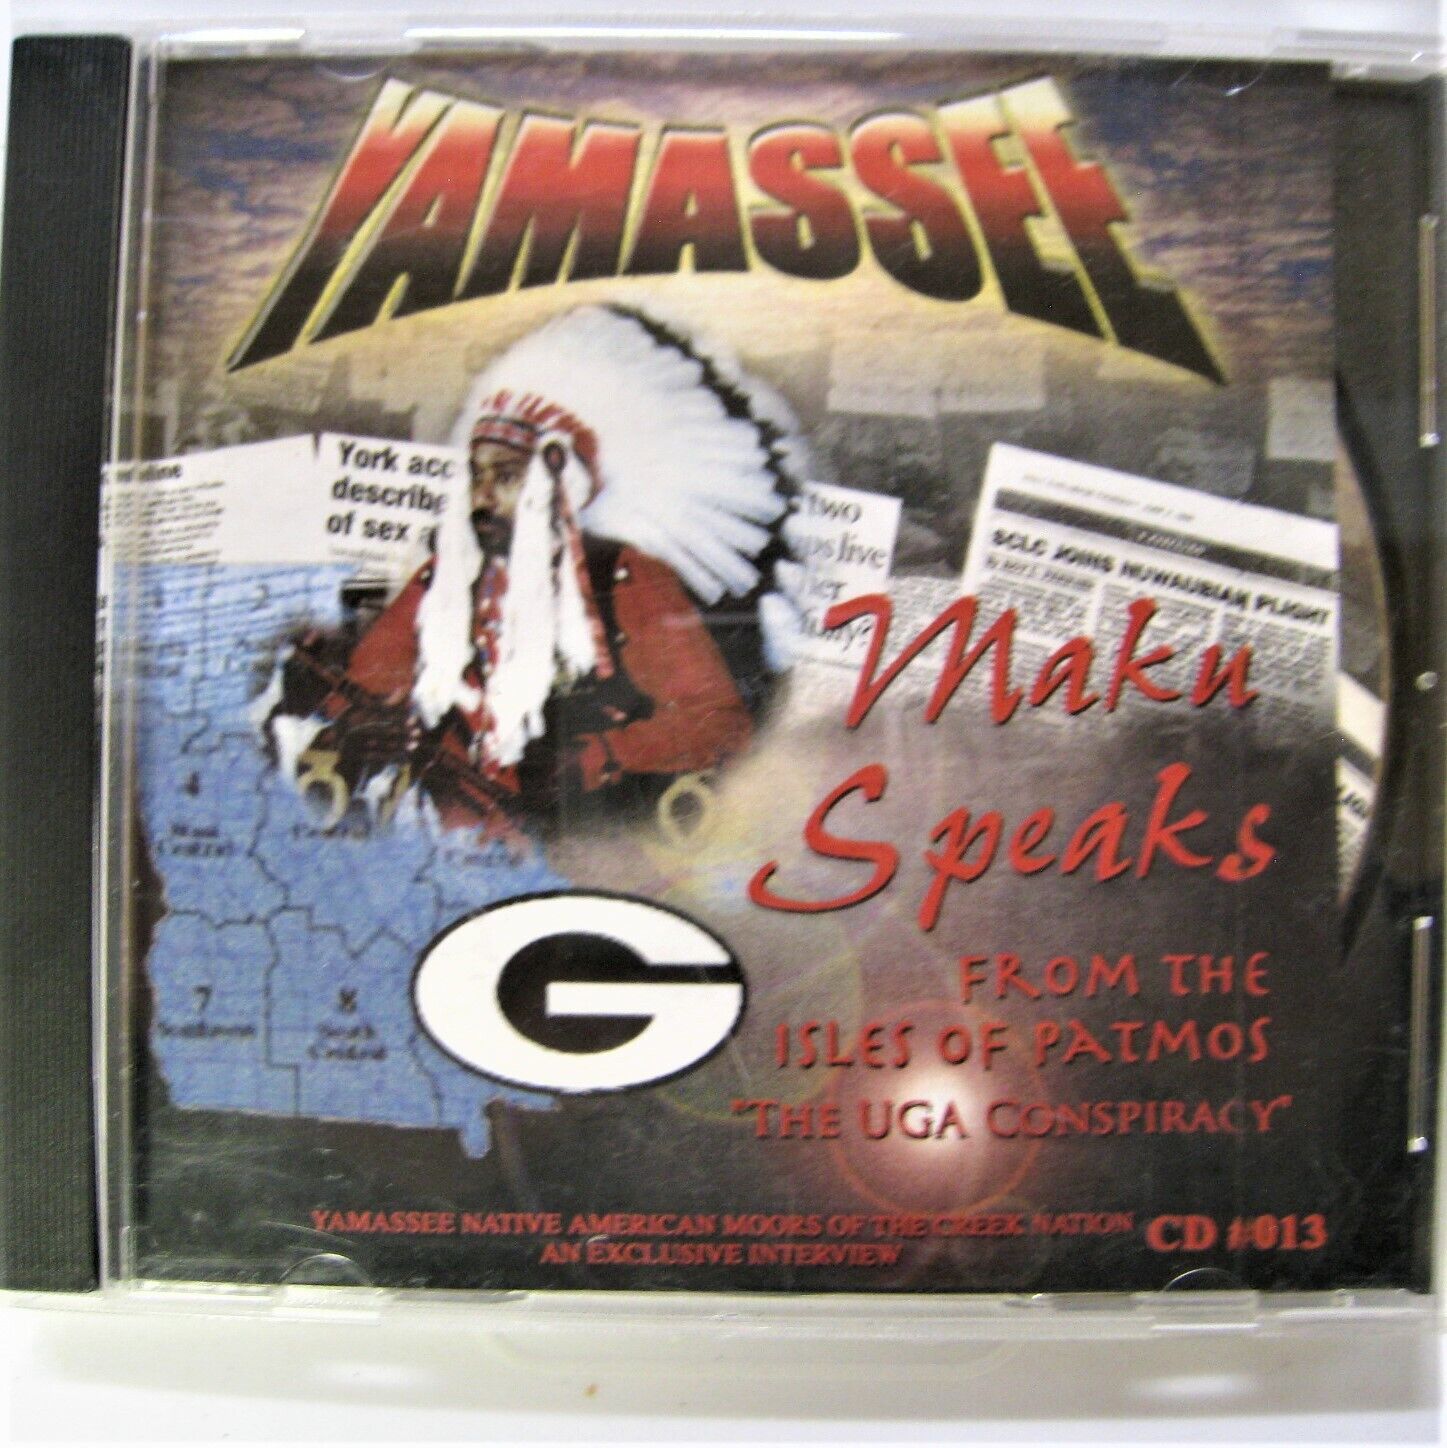 2004 Yamassee Maku Speaks From The Isles Of Patmos The UGA Conspiracy DVD